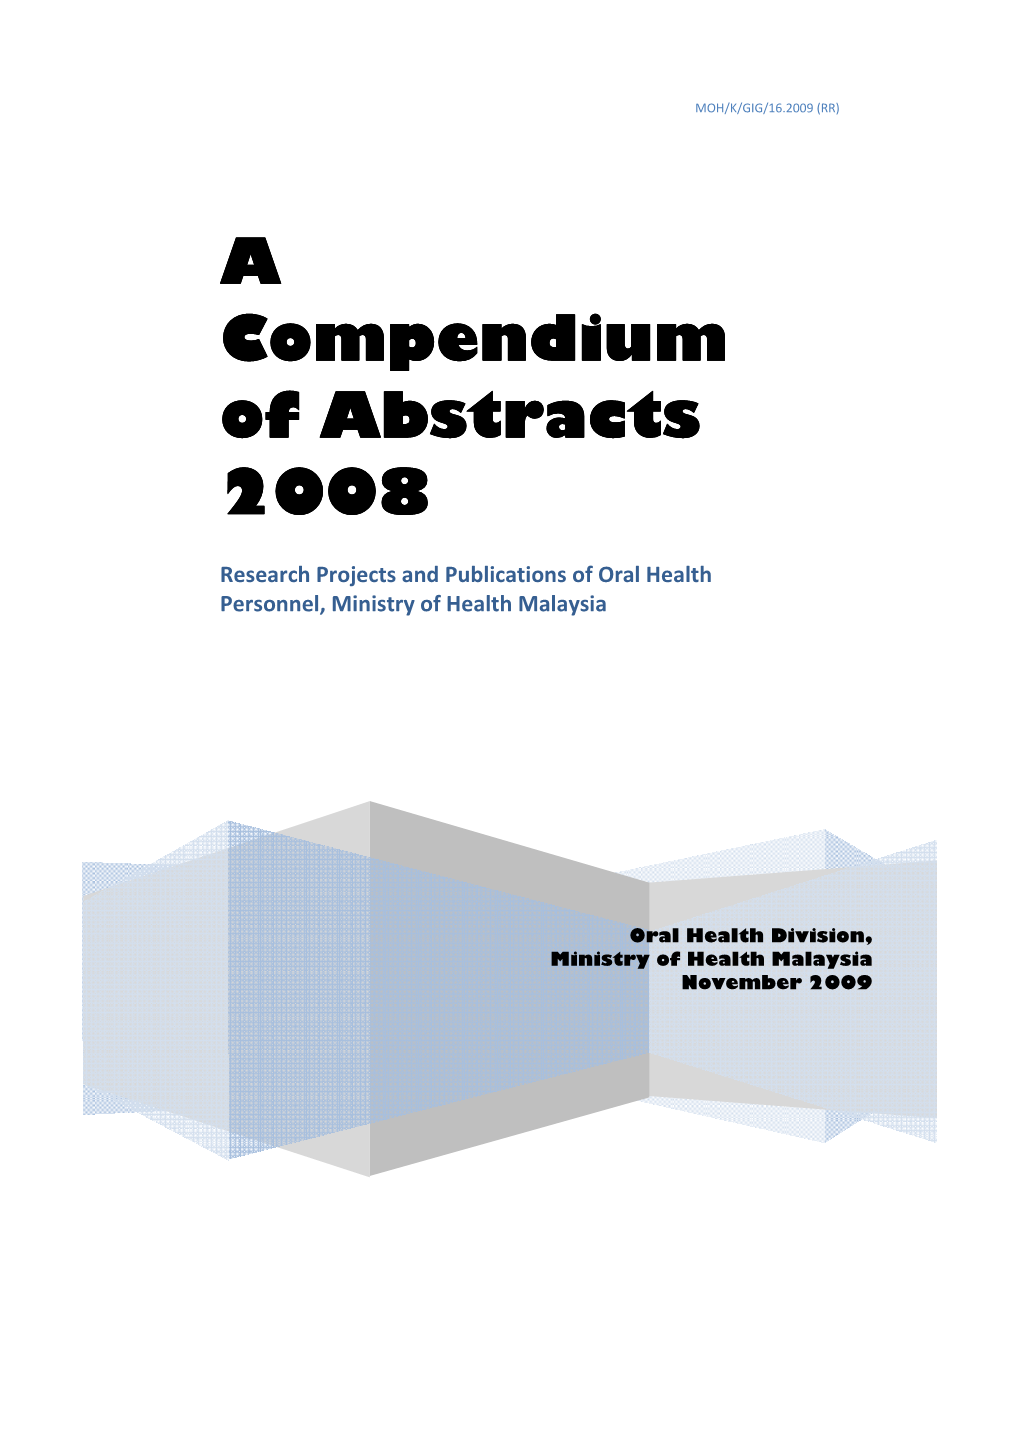 A Compendium of Abstracts 2008